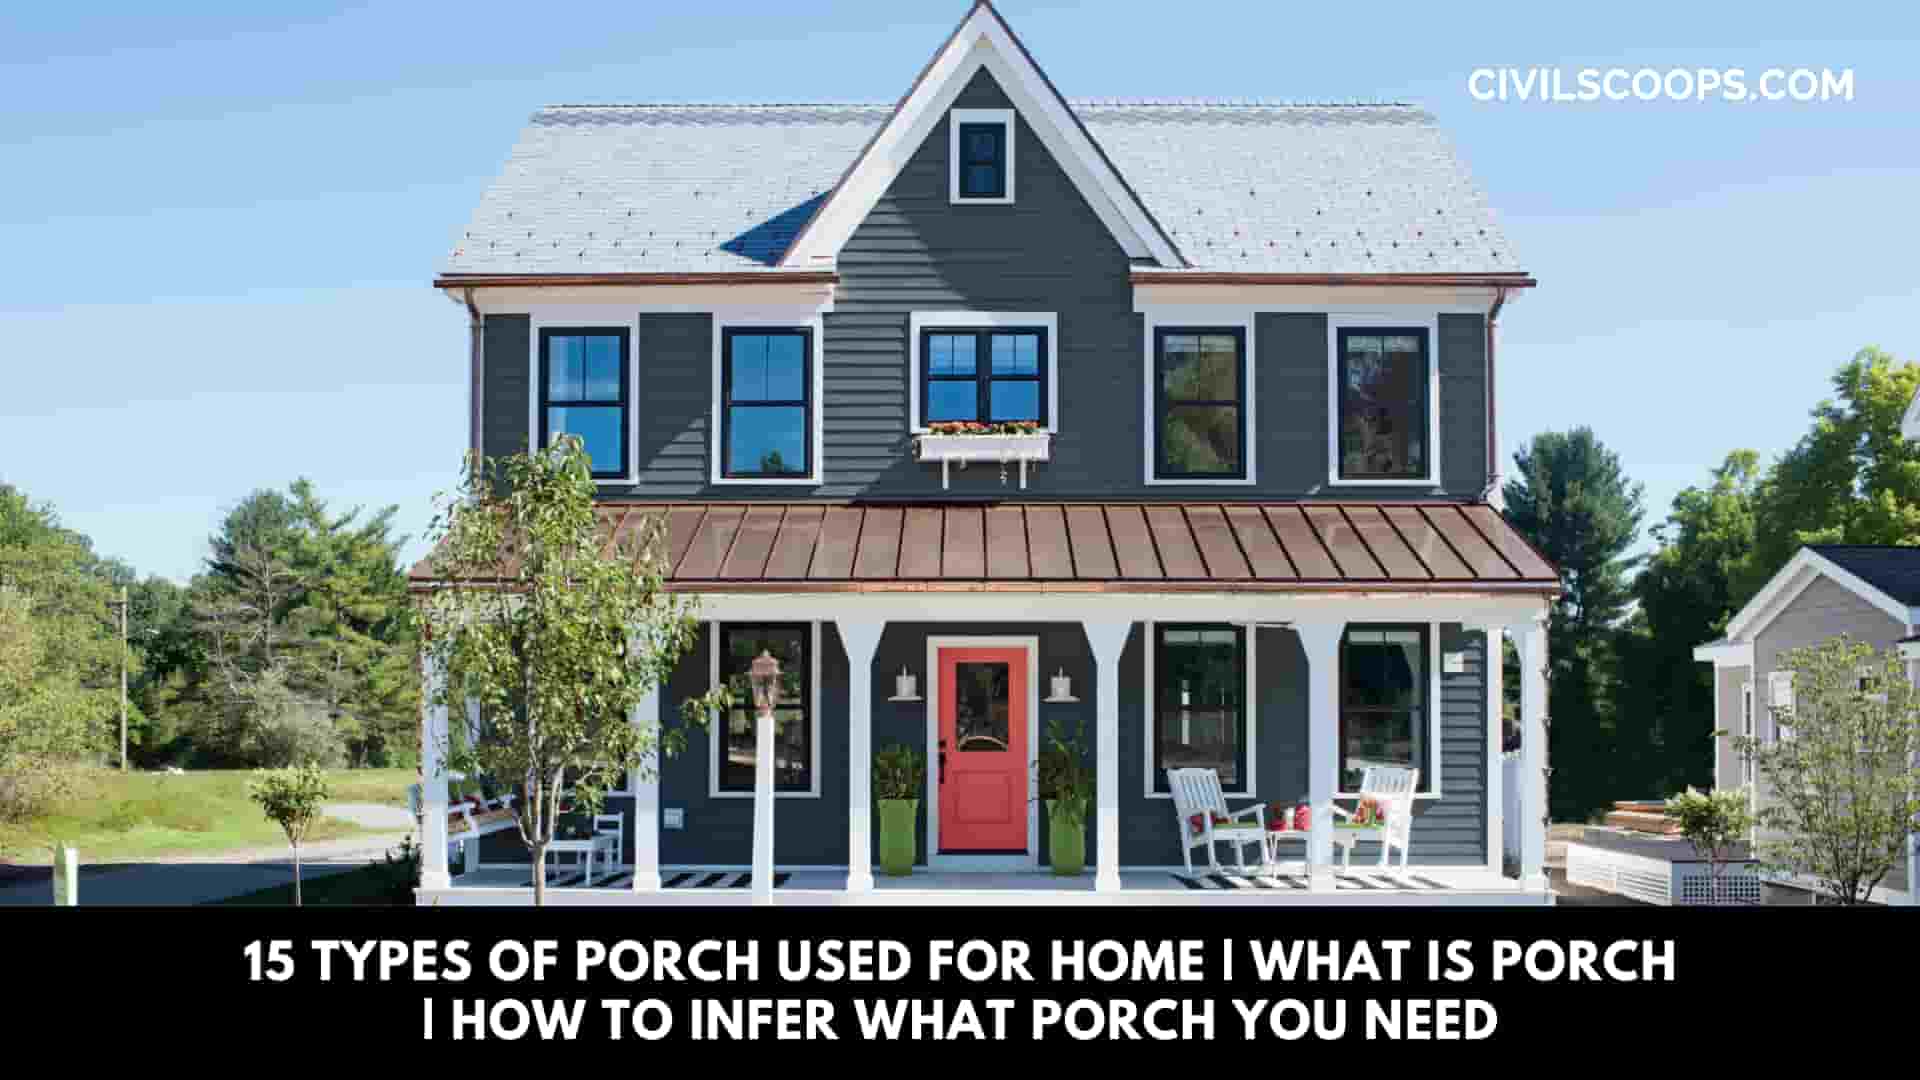 15 Types of Porch Used for Home | What Is Porch | How to Infer What Porch You Need